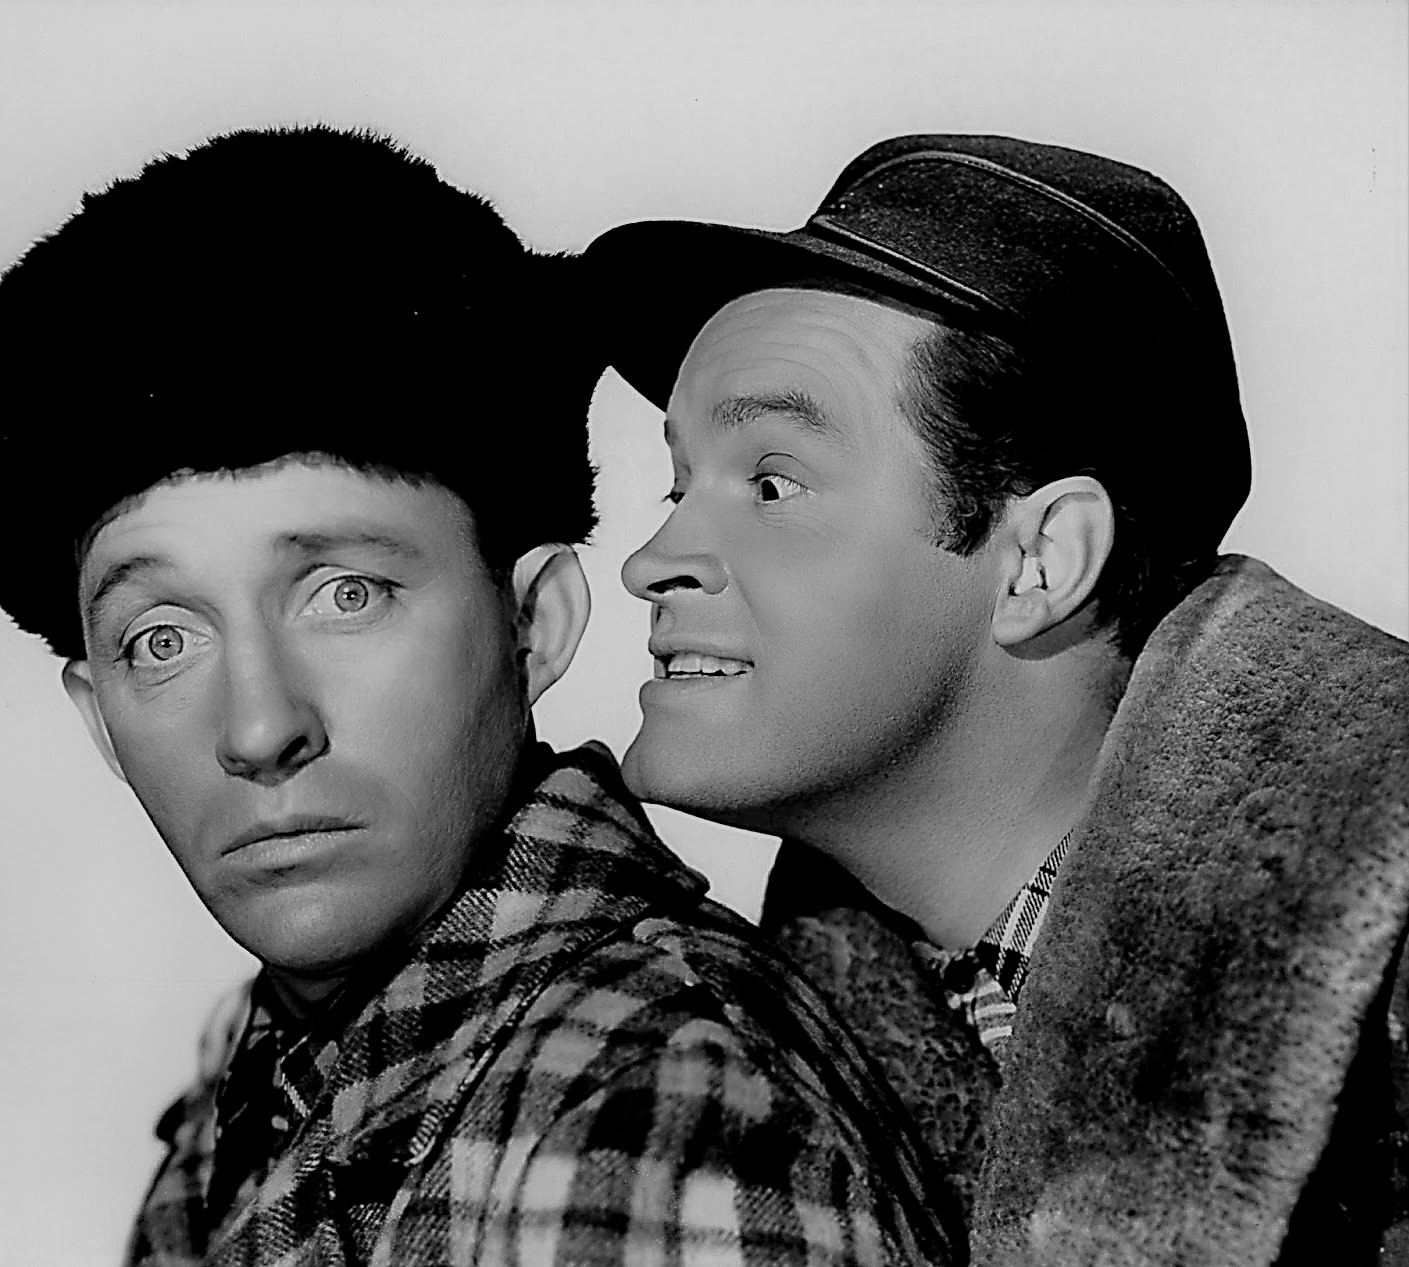 The Bing Crosby News Archive